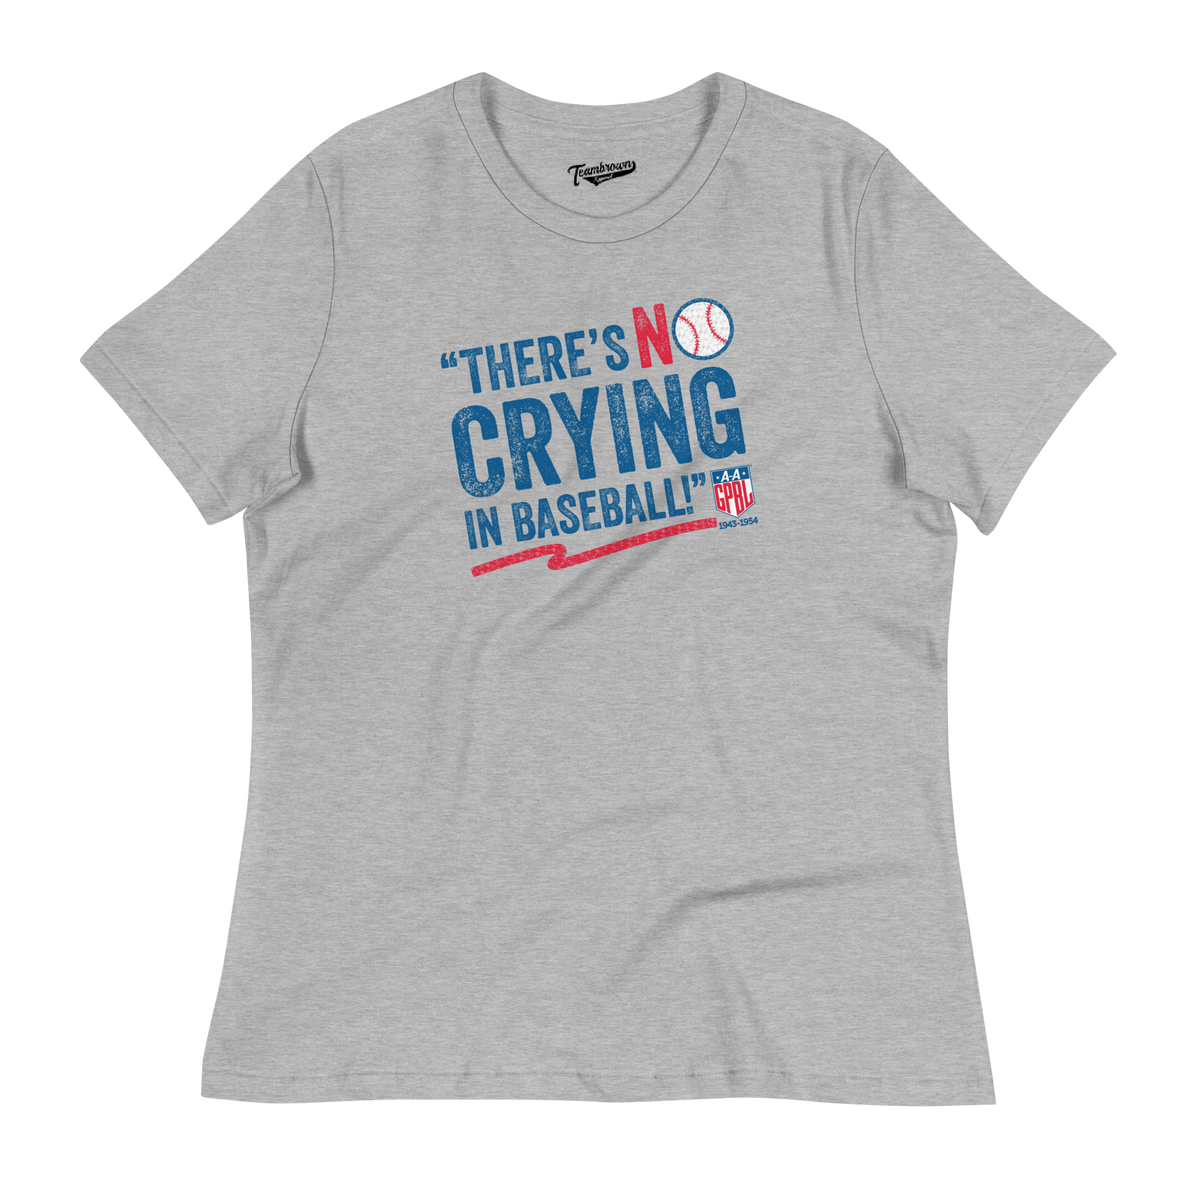 No Crying in Baseball - Women's Relaxed Fit T-Shirt | Officially Licensed - AAGPBL